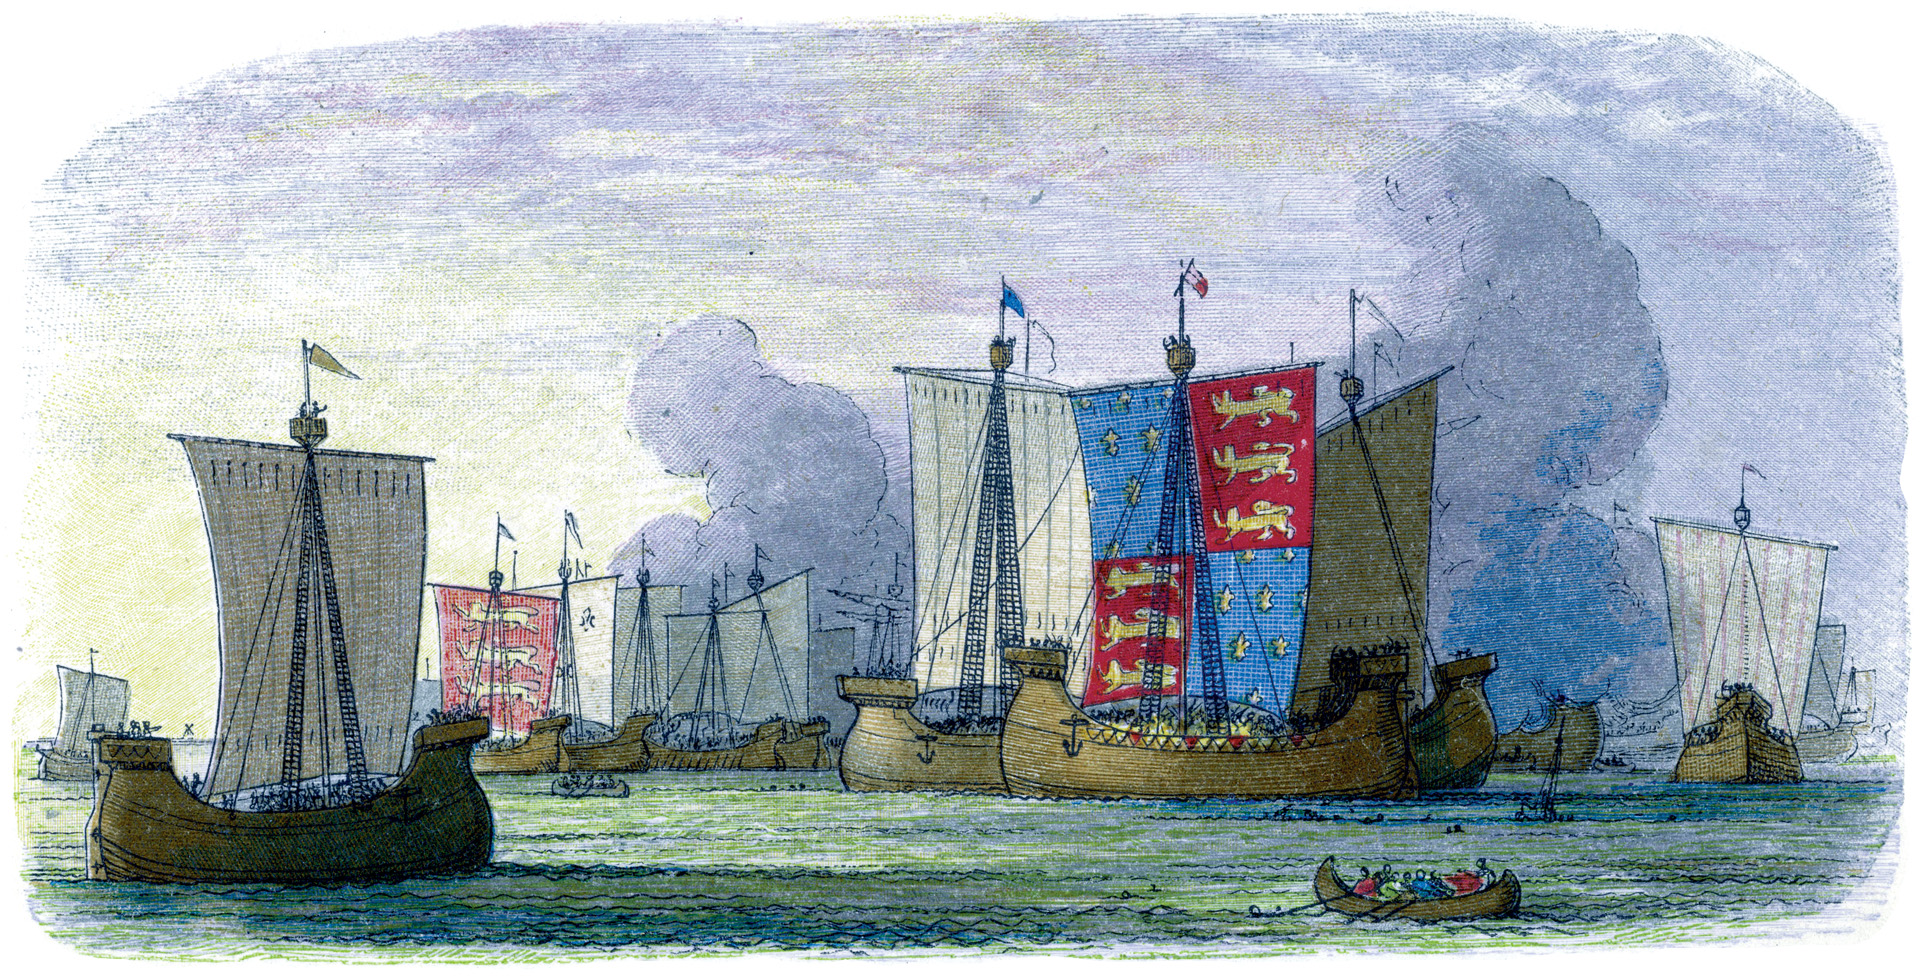 This rendition from the 19th century shows the English ships in close quarters with the French fleet. The fighting was desperate because the soldiers could not flee their vessels. 